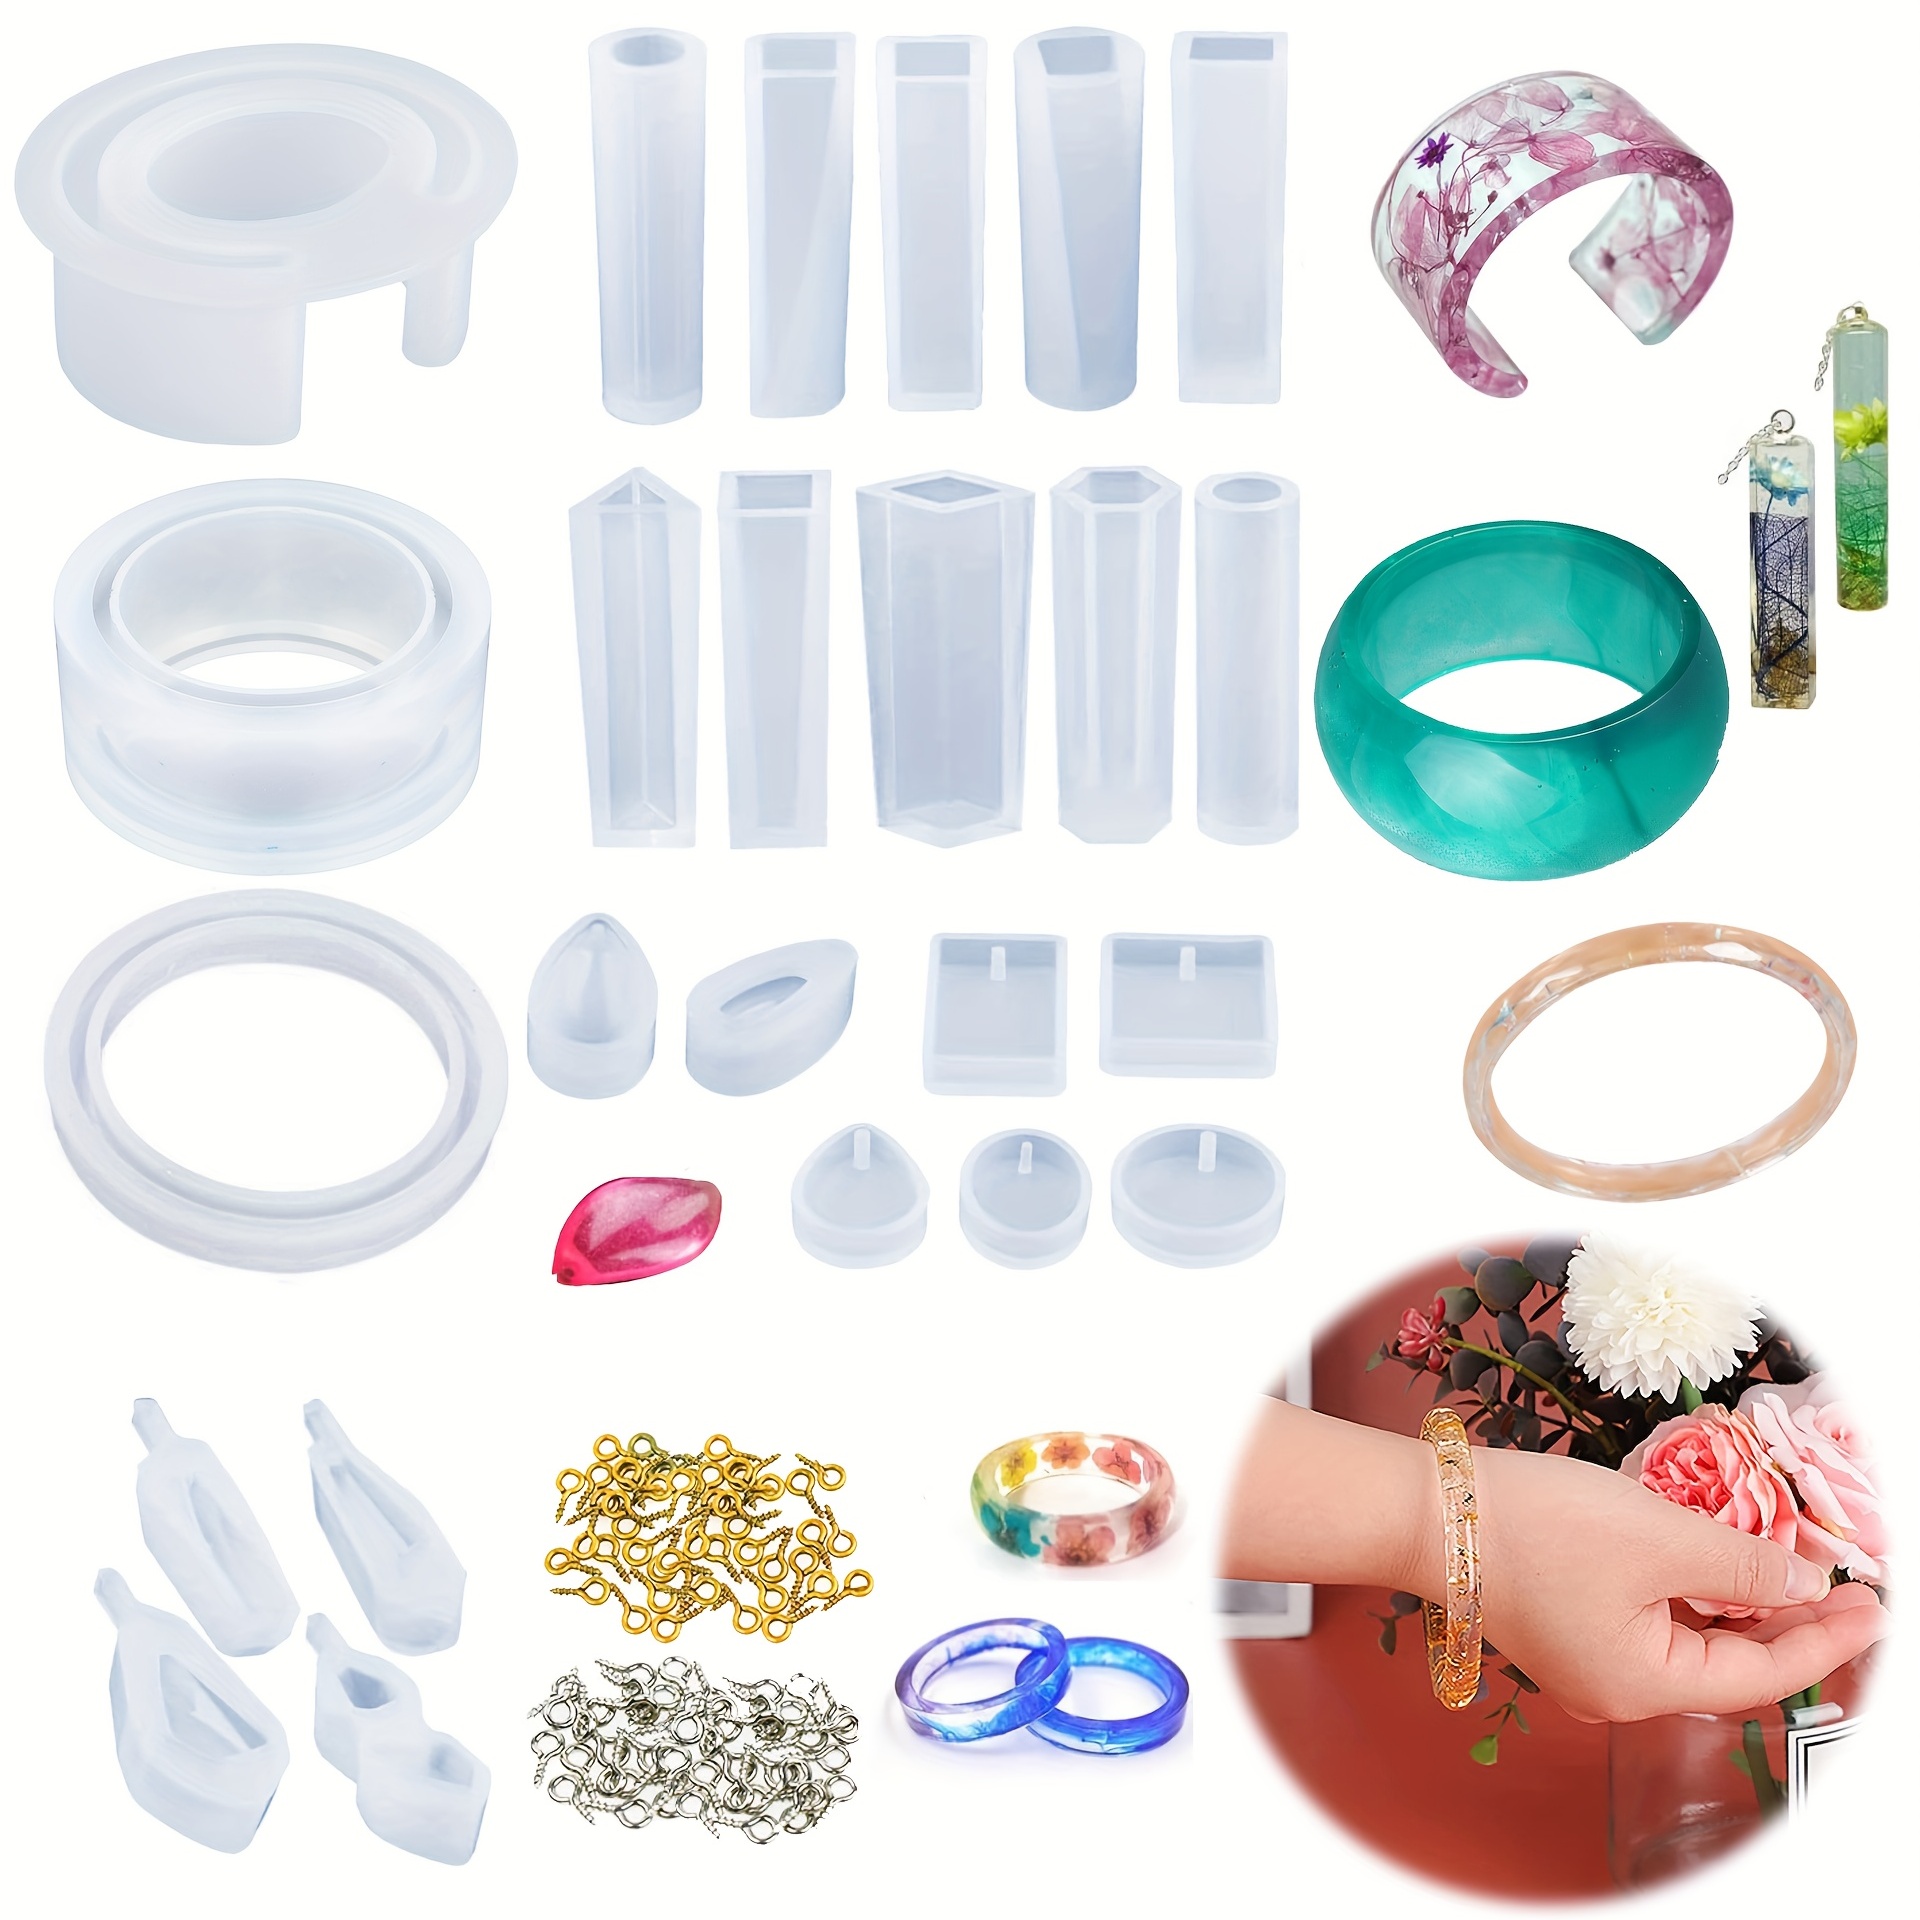 Resin Ellipse Flat Ball Bead Special-Shaped Beads Mold Resin Beads Casting  Mold Silicone Mould (8pcs Special-Shaped)